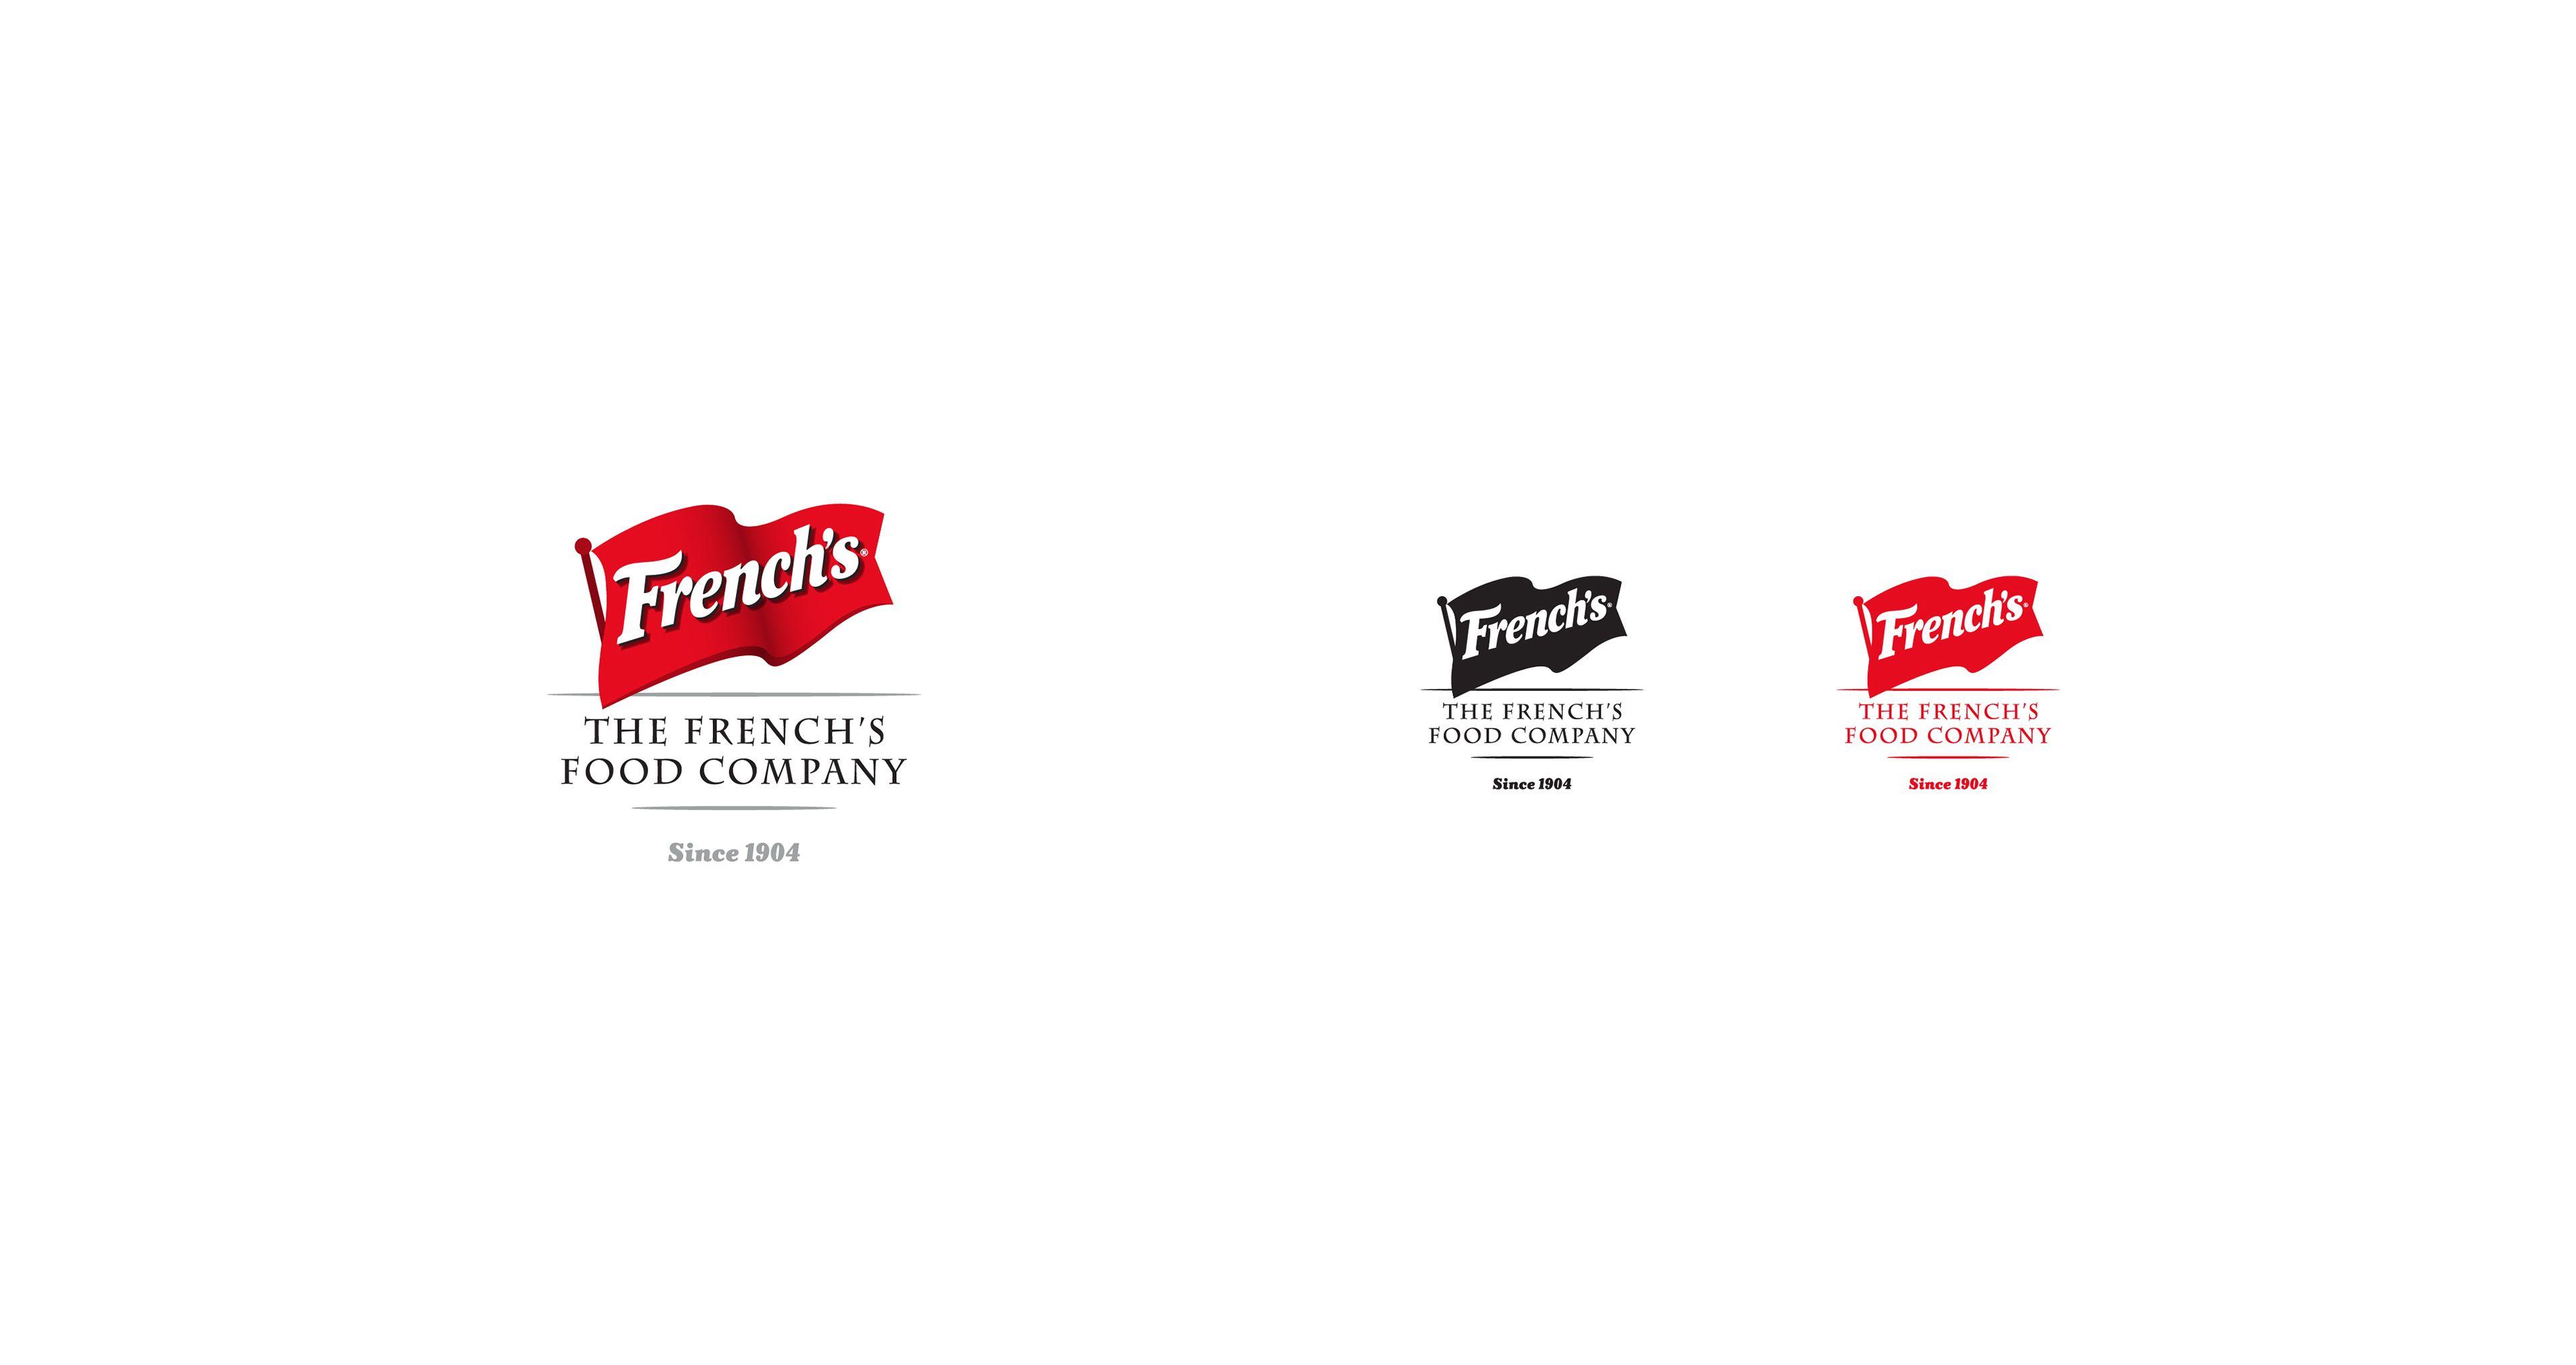 French Food Company Logo - The French's Food Company on Behance